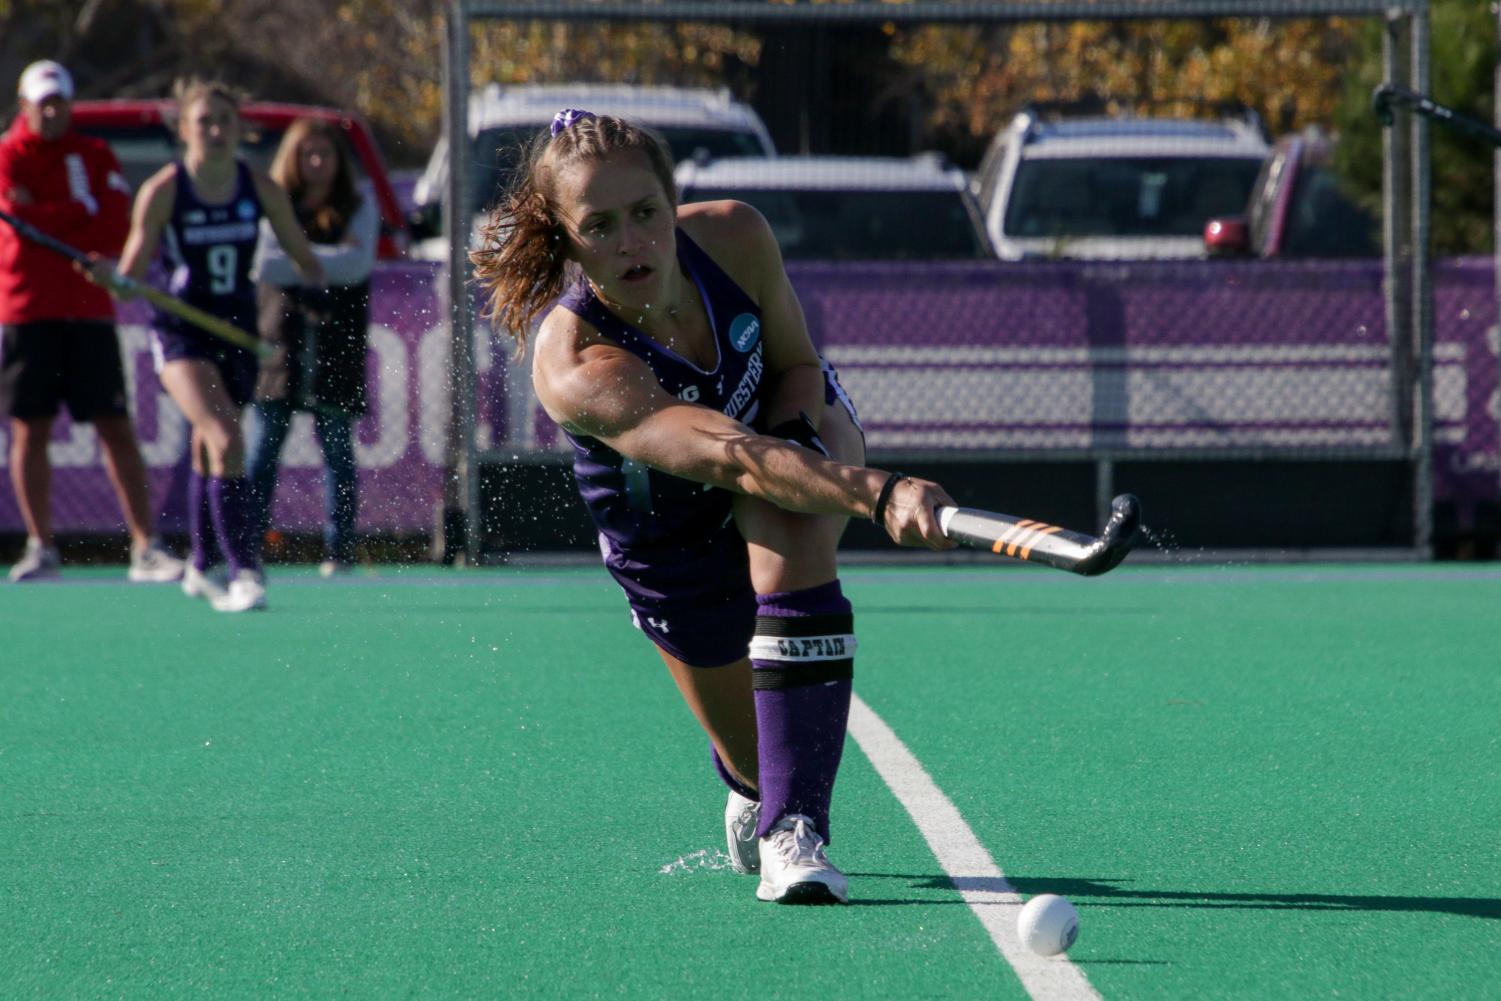 A field hockey player swings their stick to hit the ball.